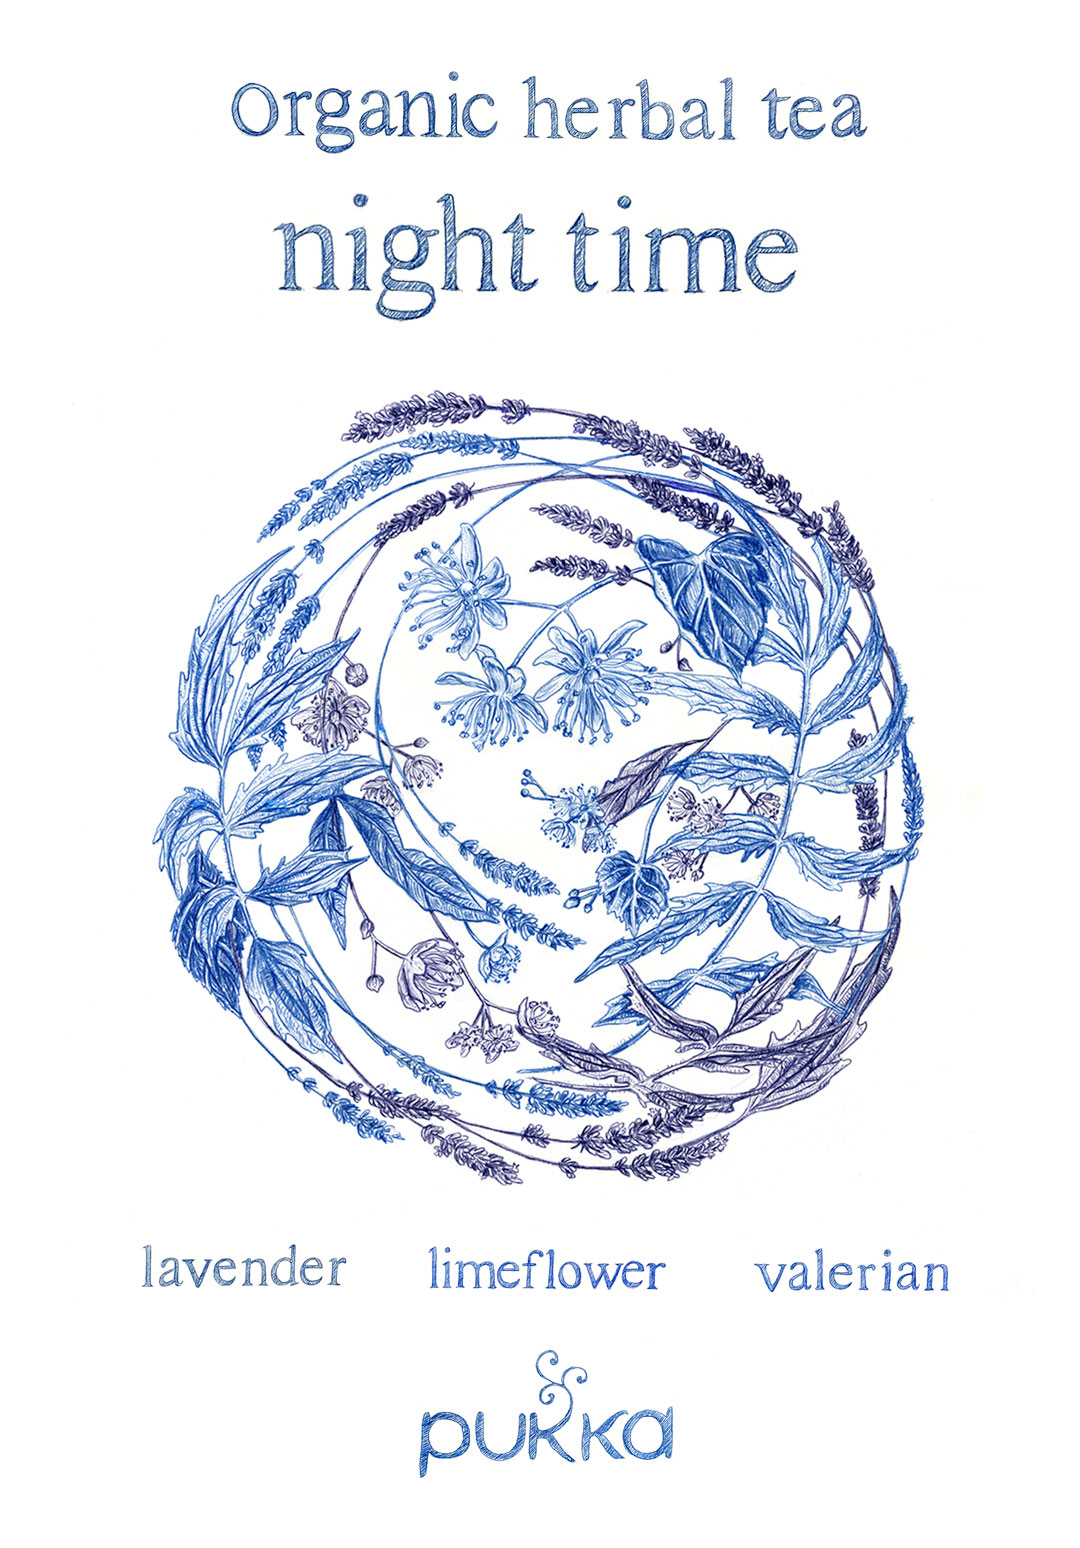 Dark blue and purple coloured pencil drawing of lavender, limeflower and valerian forming a circular composition in the centre of the poster. Complete with hand-rendered text.